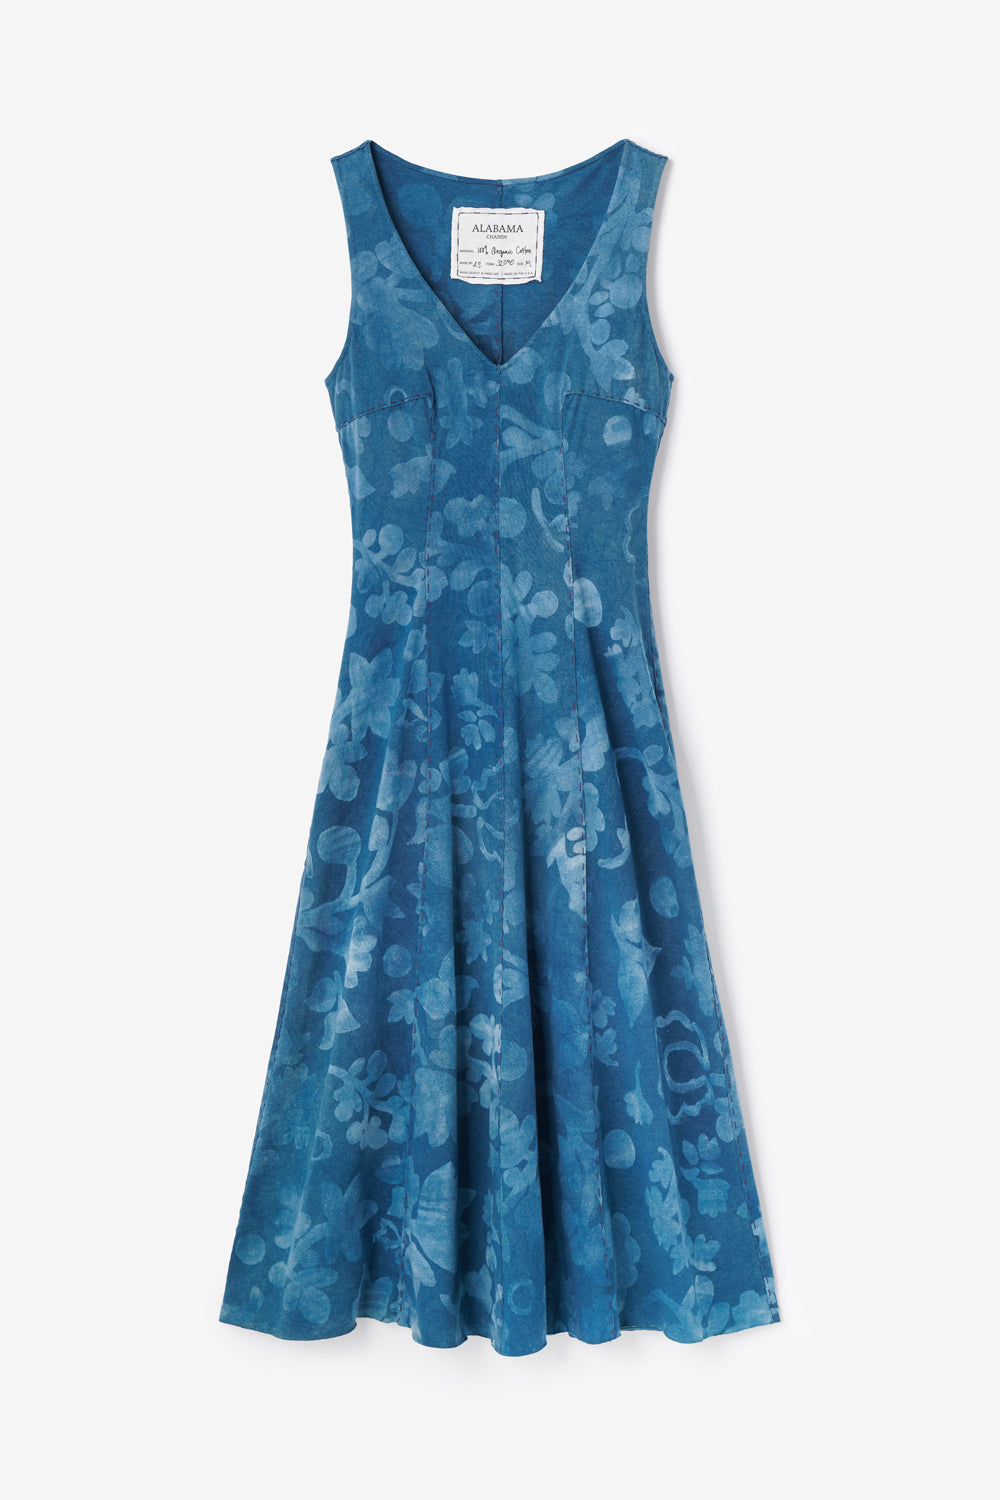 Alabama Chanin Niko Dress featuring hand-sewn seams and painted floral motif. Shown in Indigo color with white flowers.